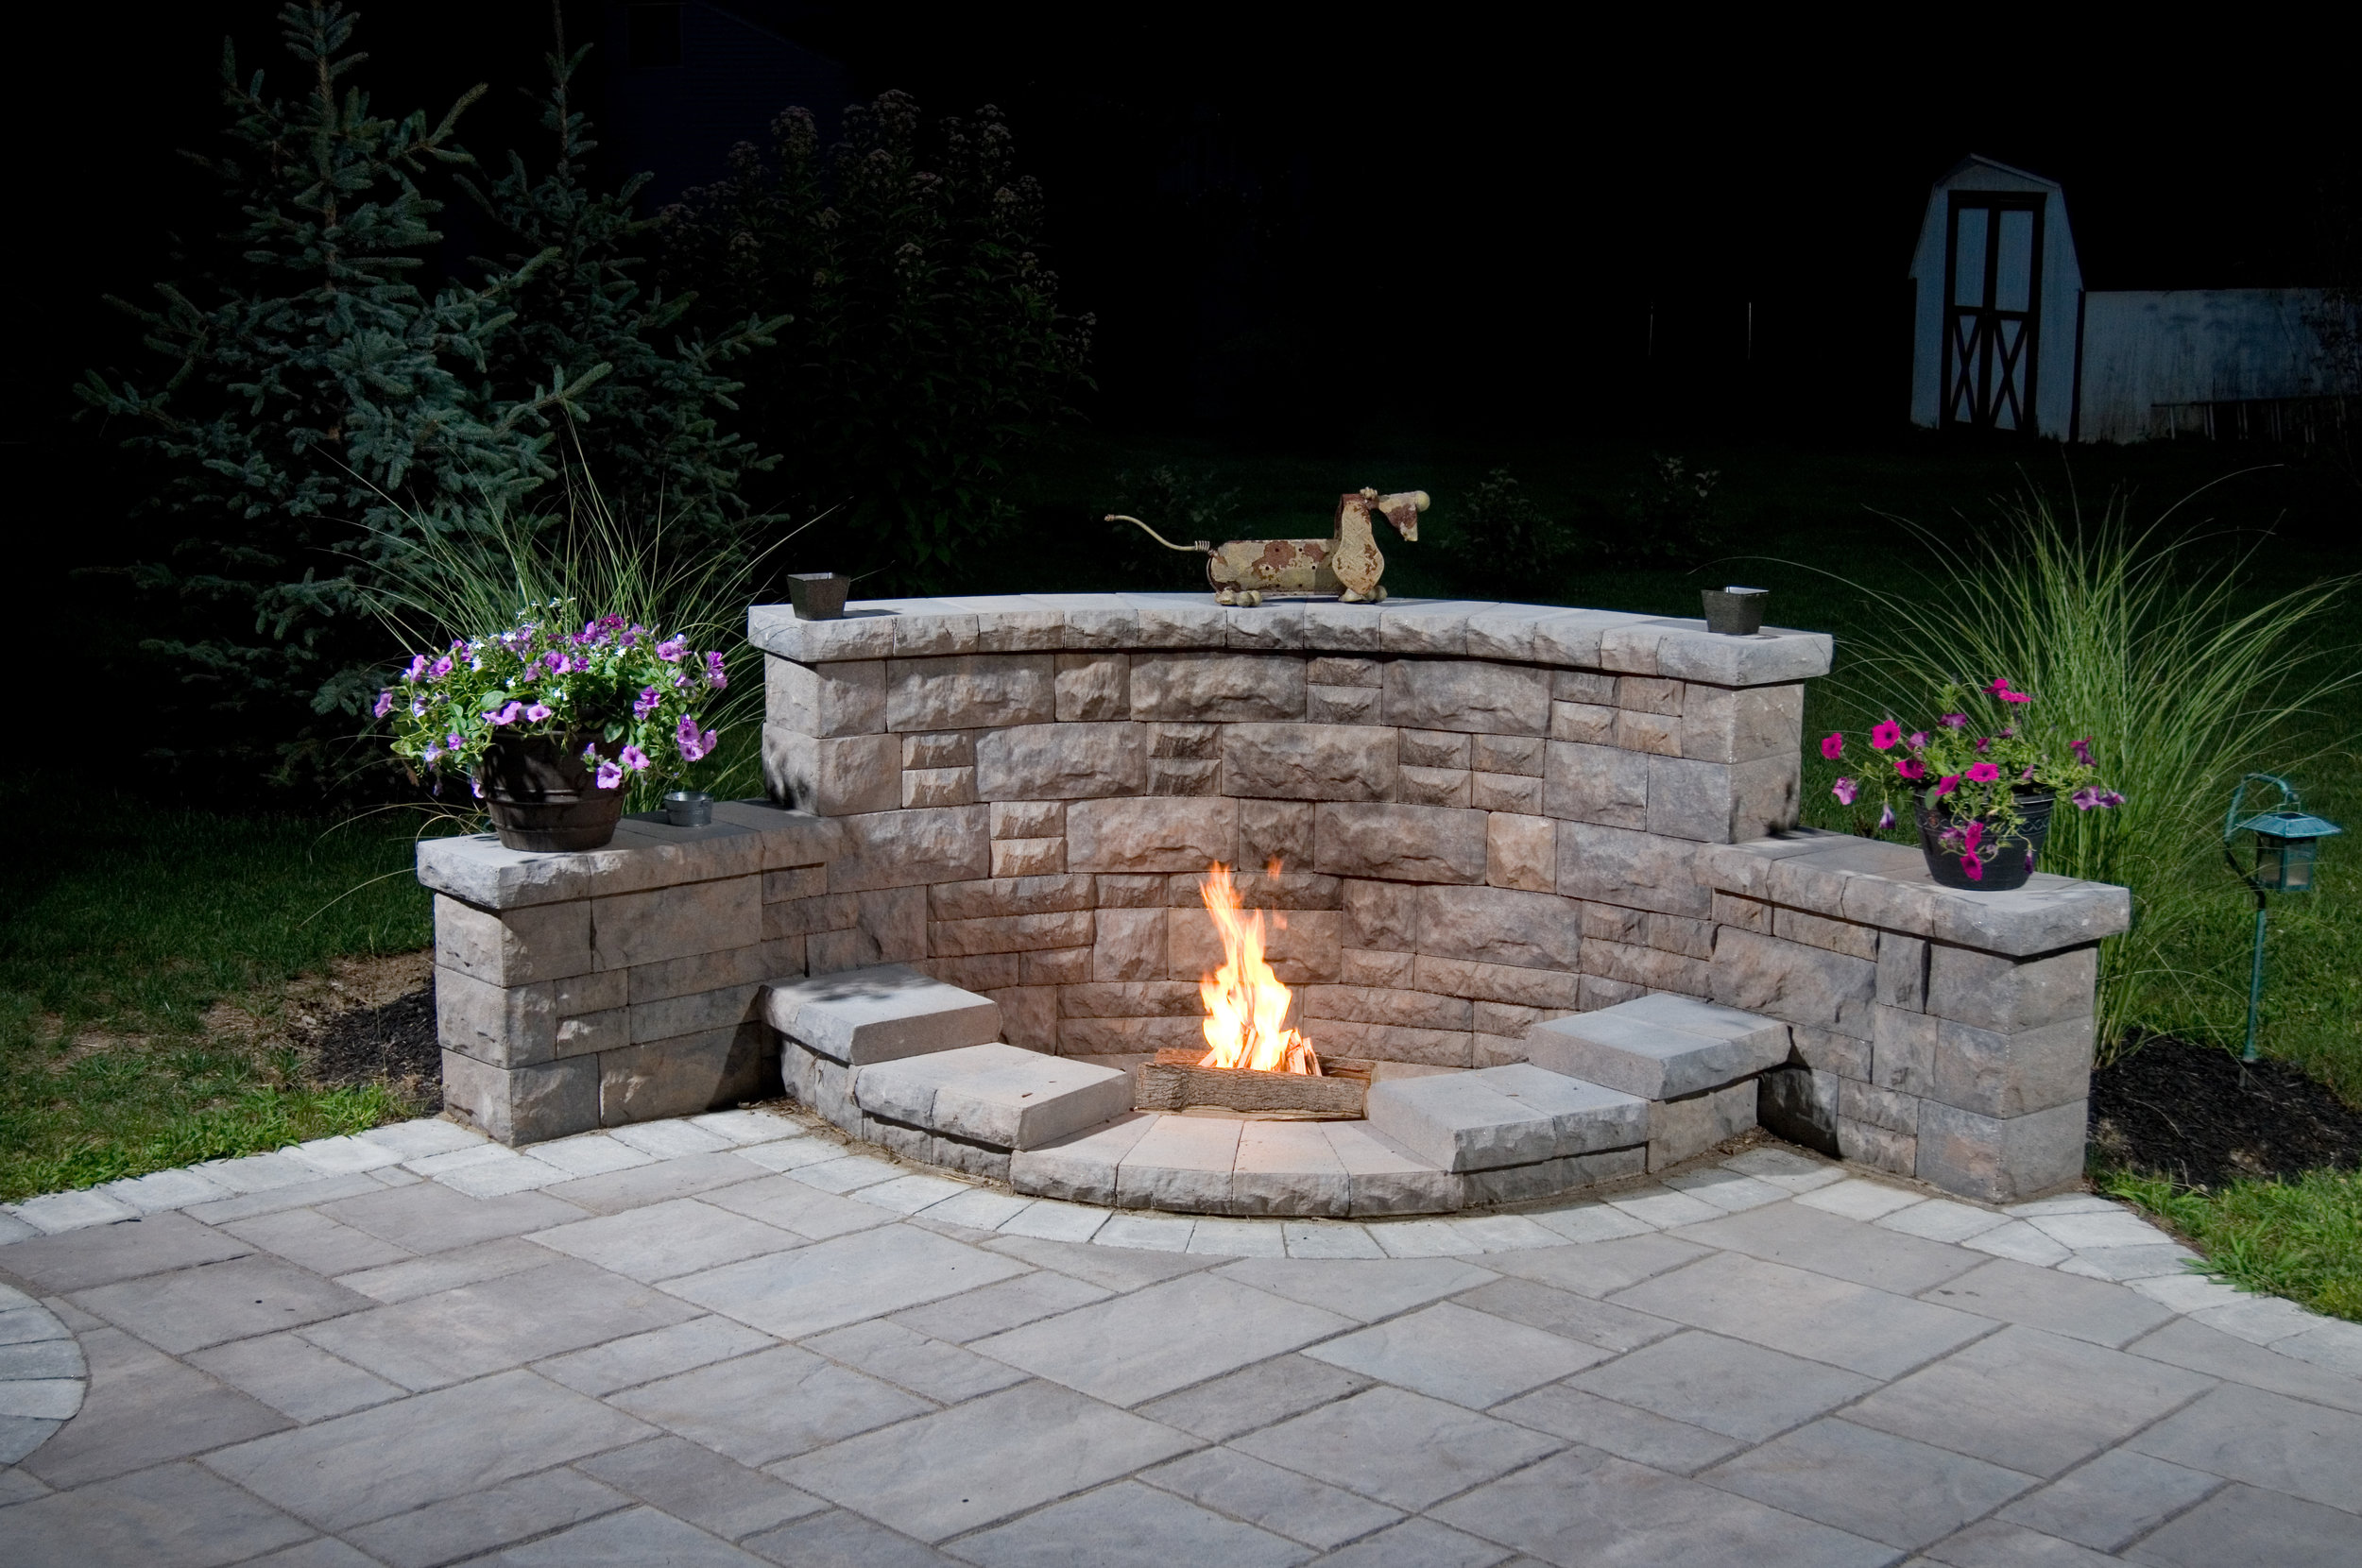 4 Beautiful Outdoor Fireplace And Fire, Outdoor Fireplace Fire Pit